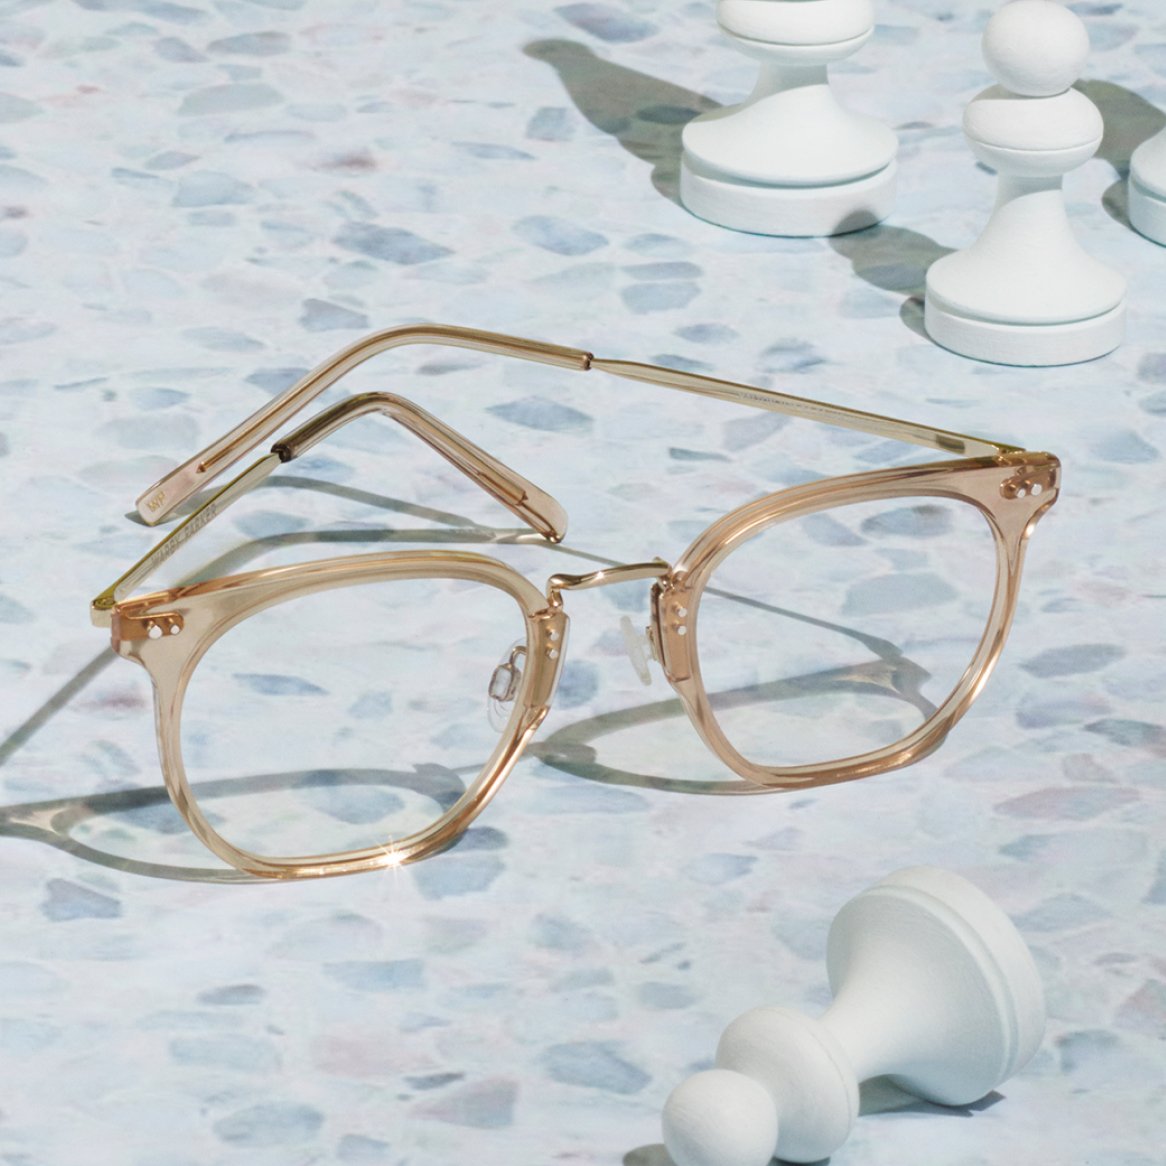 A pair of eyeglasses pictured with chess pieces on a light-colored surface